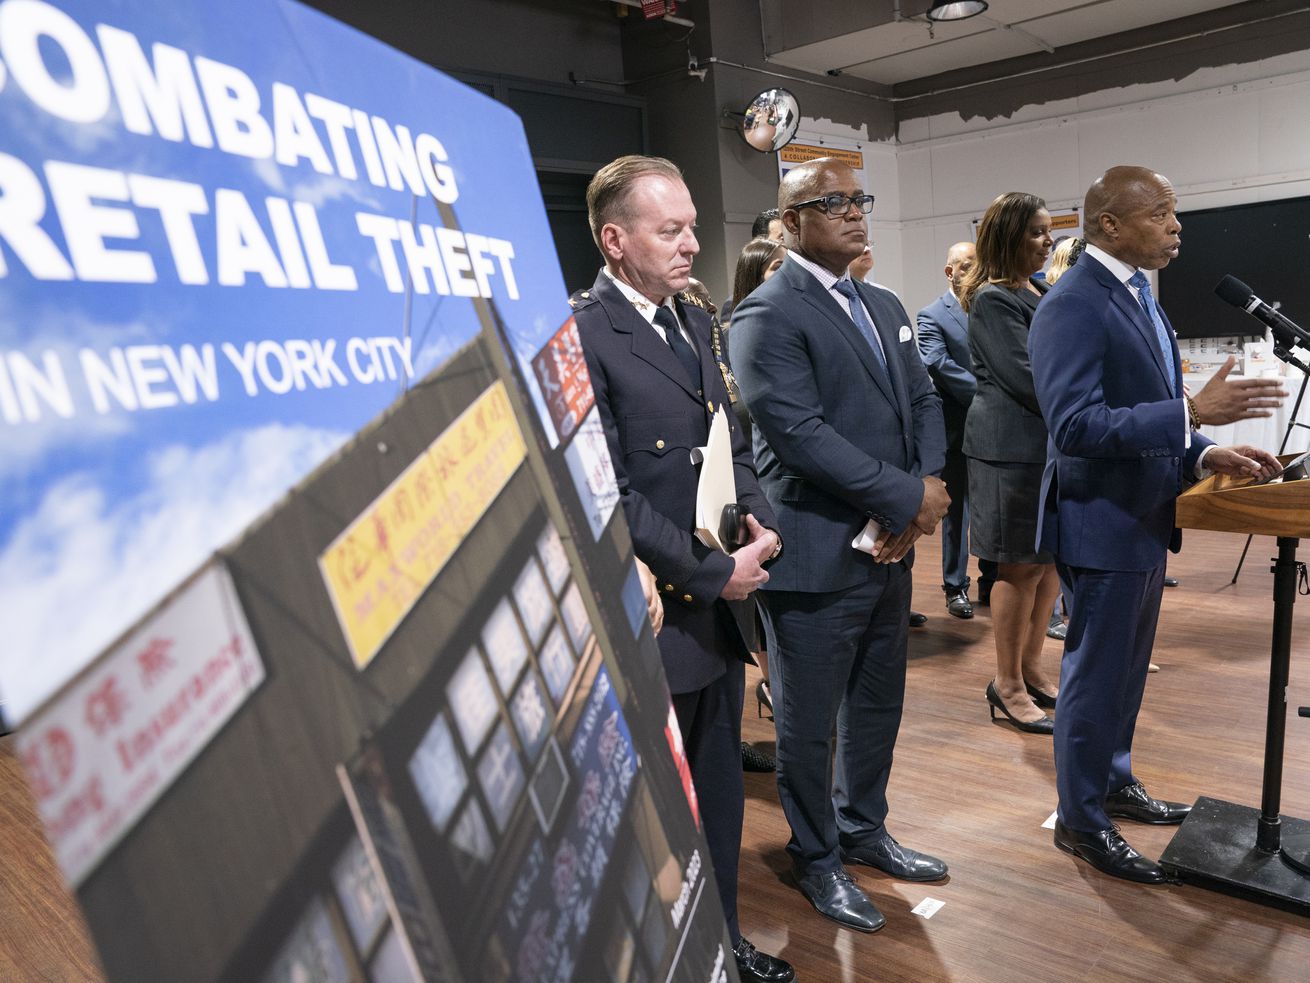 Sigh that reads “Combating Retail Theft” is seen in the foreground while New York City Mayor Eric Adams speaks at a lectern.